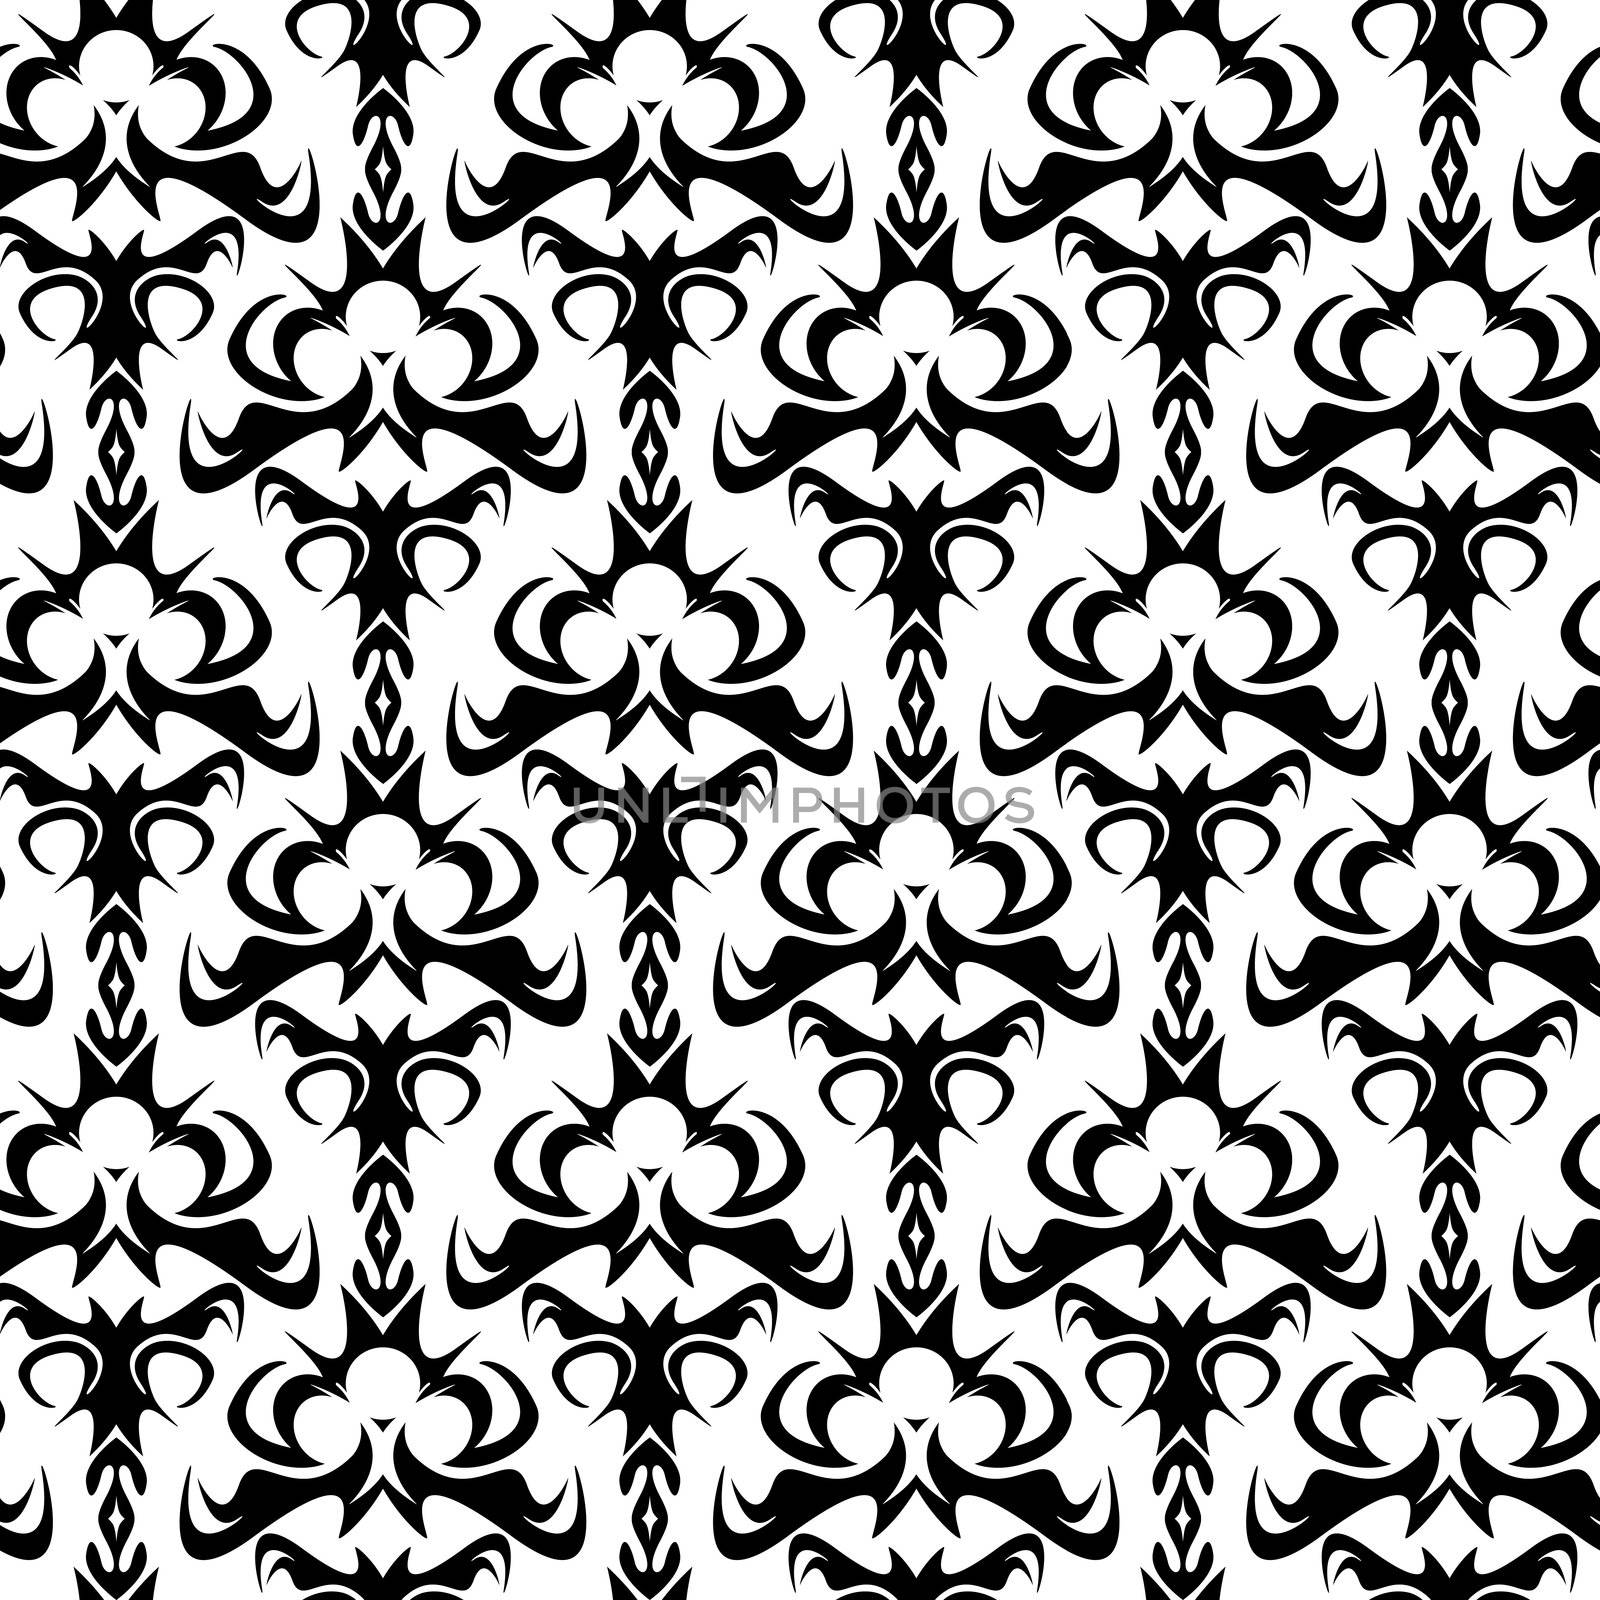 Seamless Vector Damask Pattern by graficallyminded